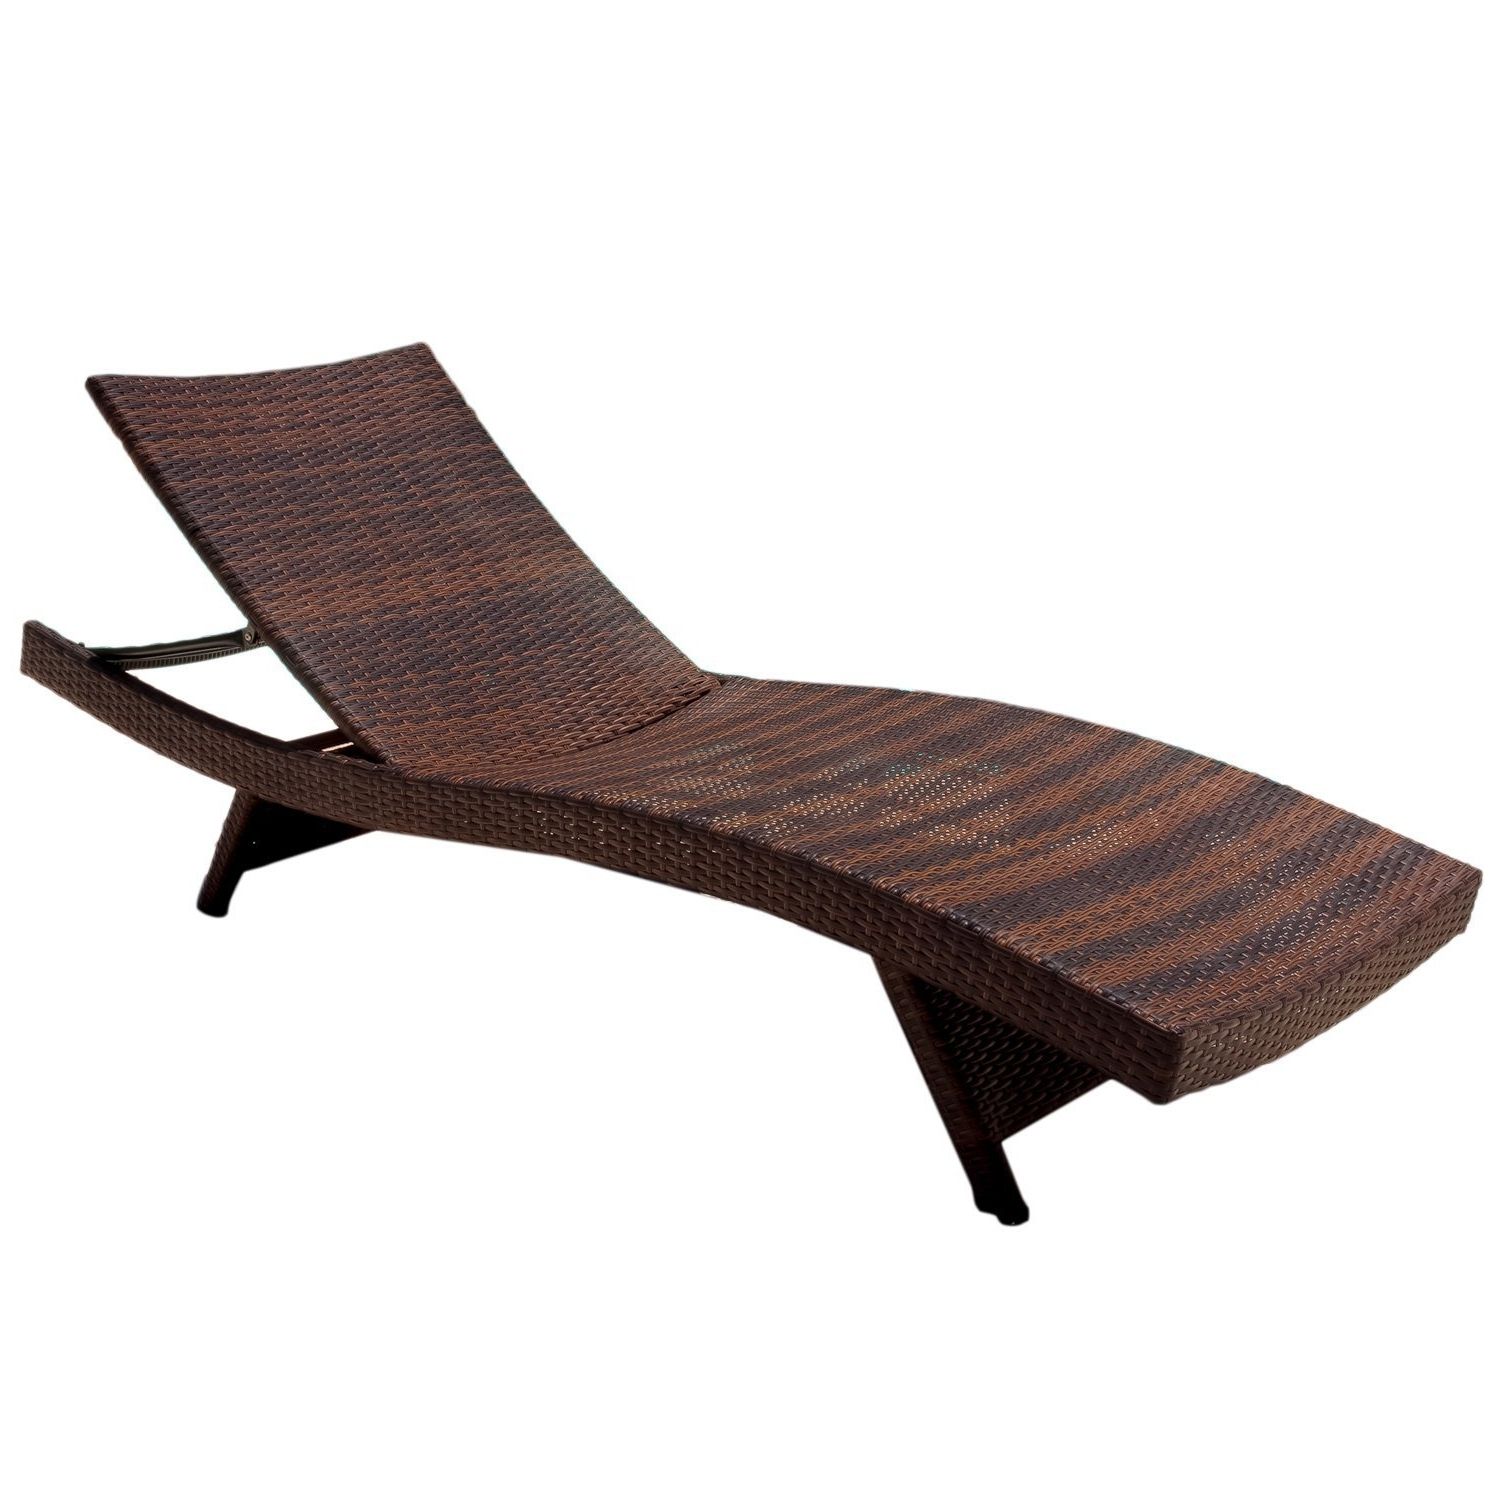 Amazon : Best Selling Outdoor Adjustable Wicker Lounge, Brown In Popular Wicker Chaise Lounge Chairs For Outdoor (View 14 of 15)